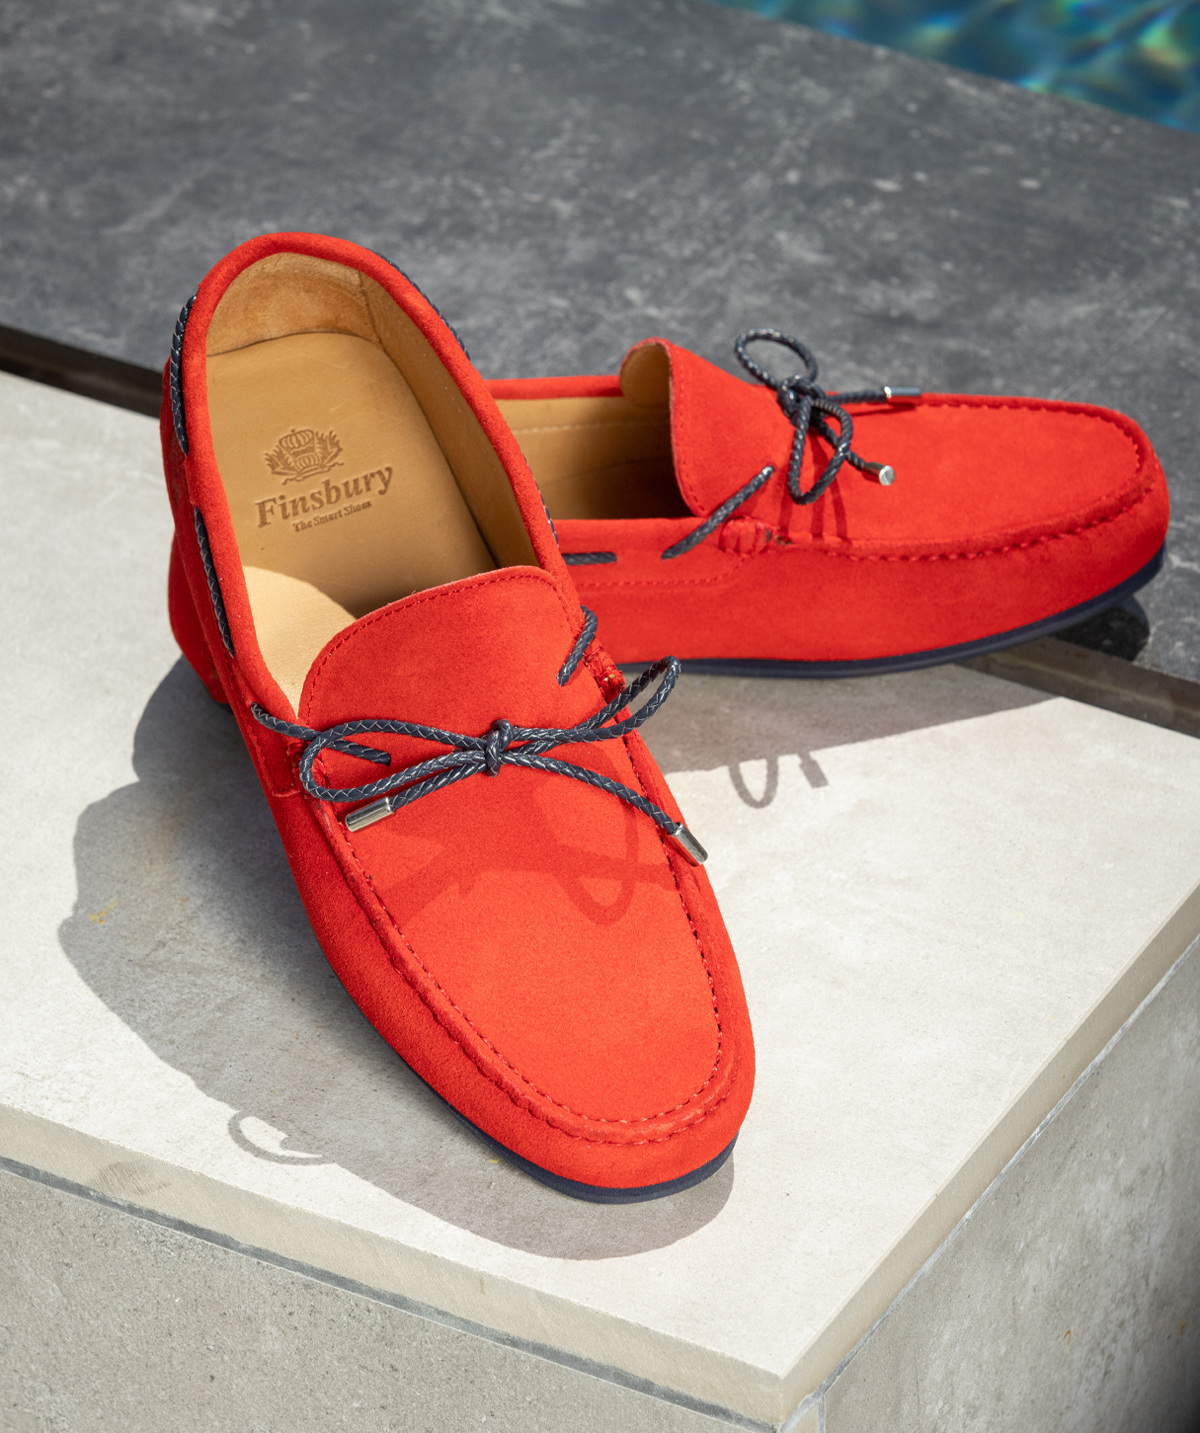 Loafer CANCUN Red Suede